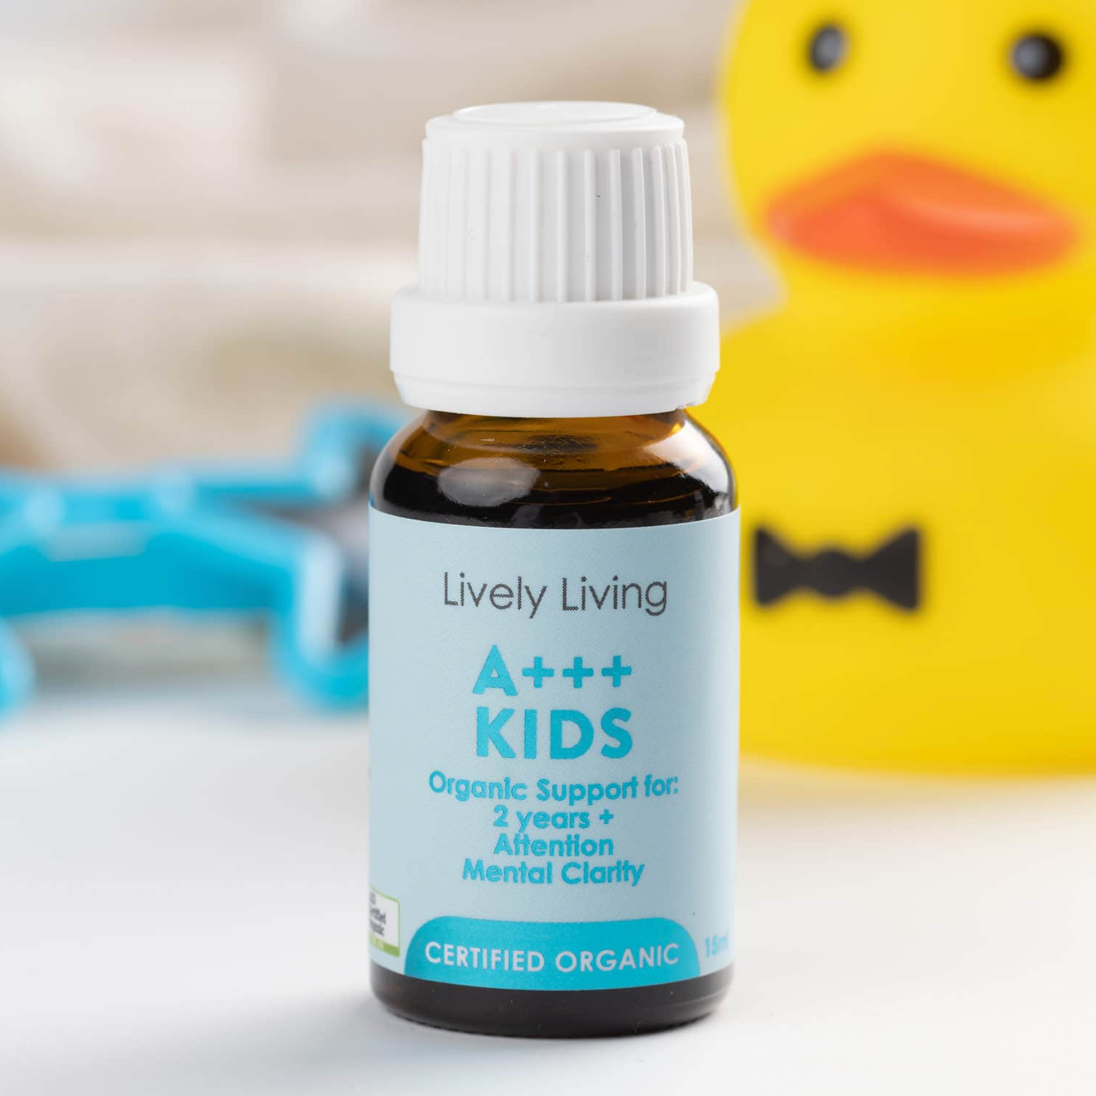 Lively Living Organic Essential Oil Blend 15ml, A+++ Kids